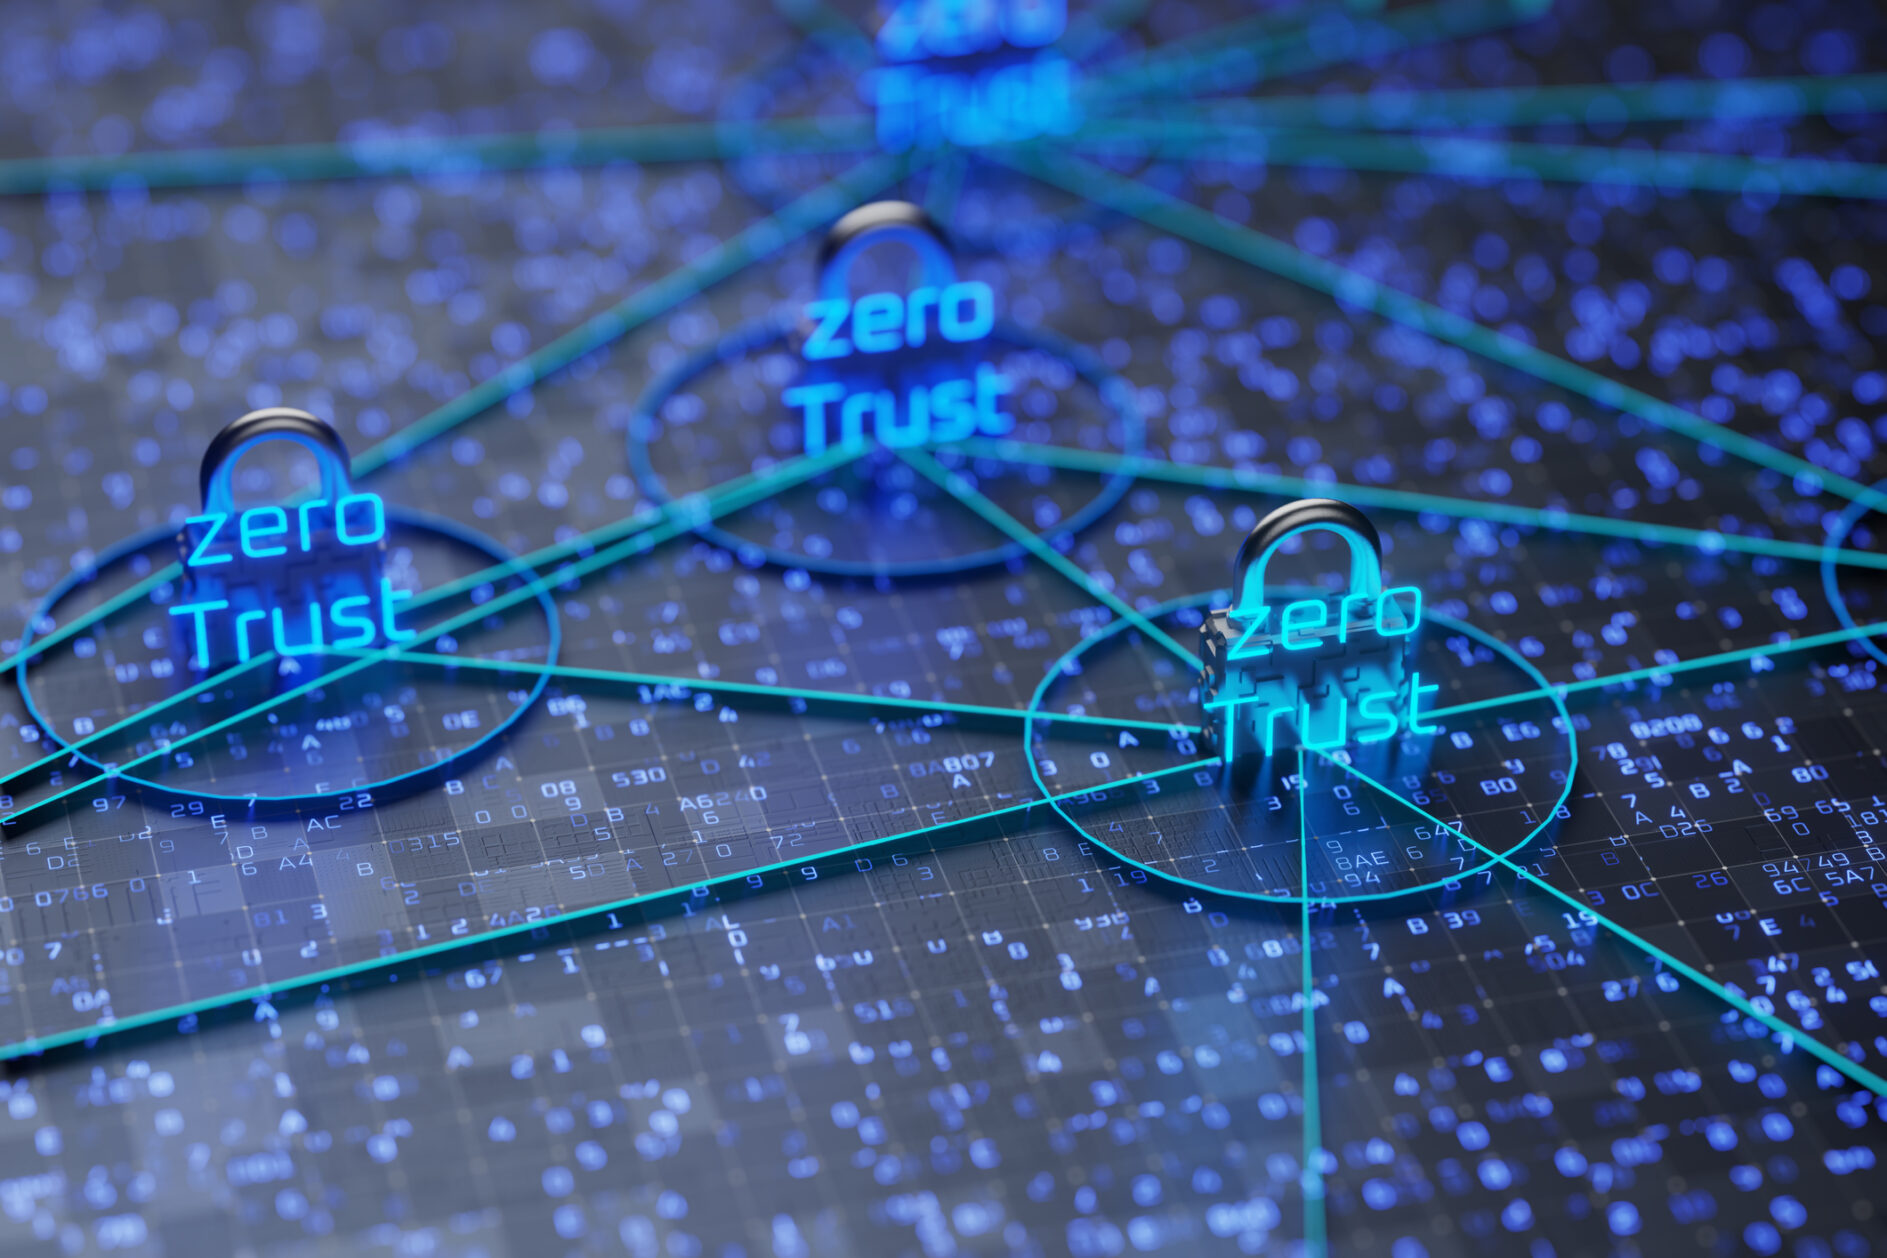 Trends in Zero Trust: Strategies and Practices Remain Fragmented, but Many Are Seeing Success